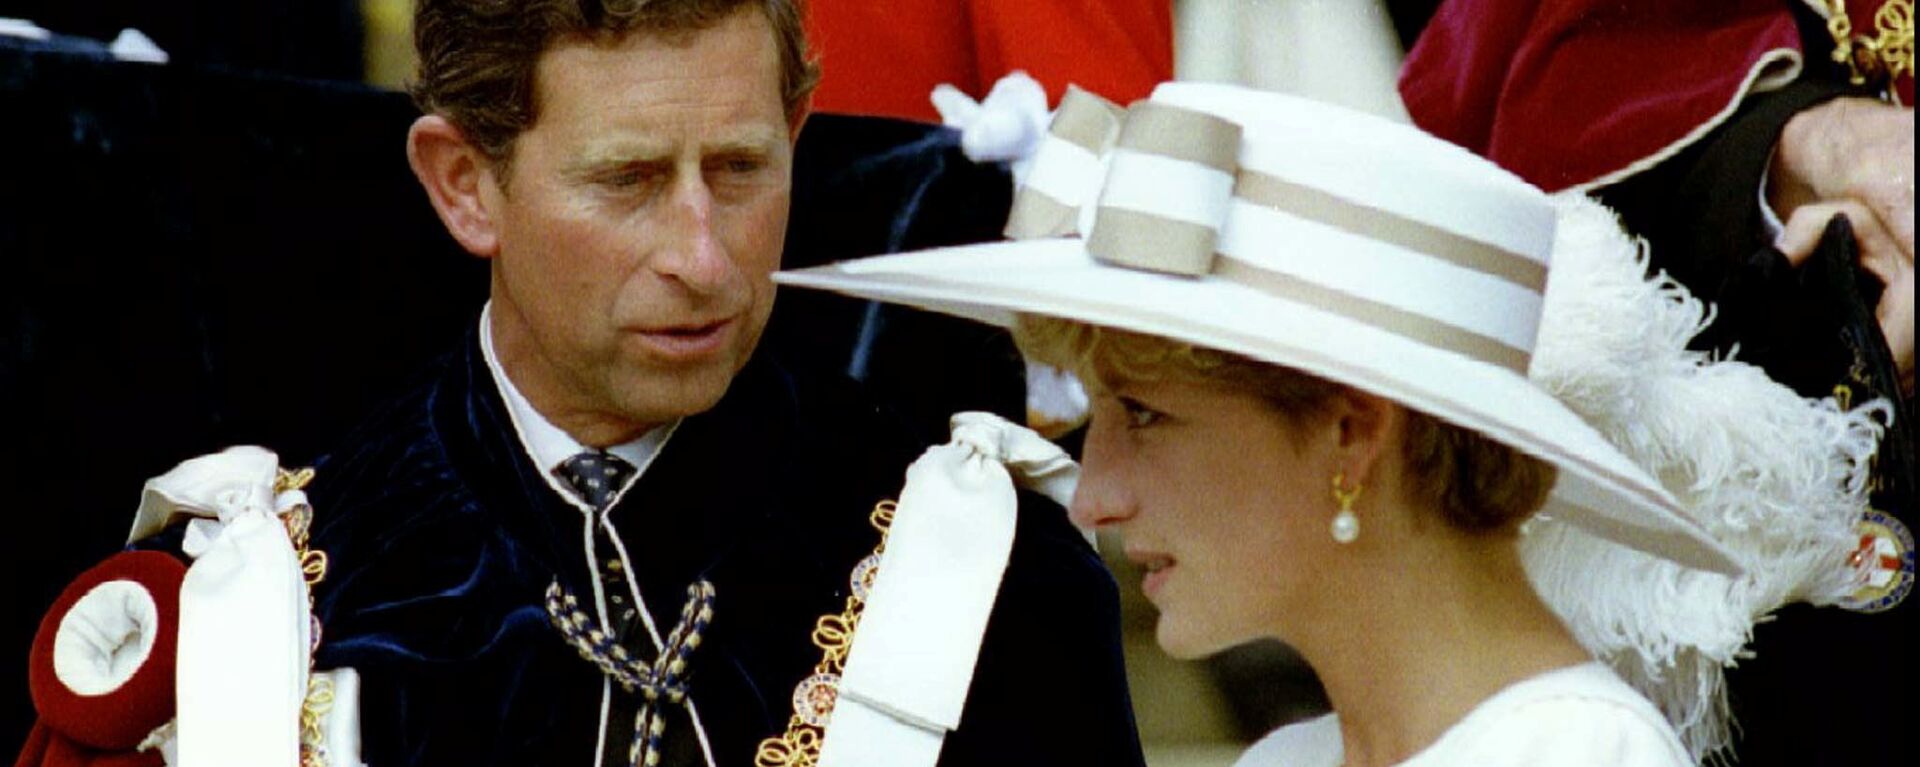 Prince Charles looks towards Princess Diana as they await their carriage to depart the Order of the Garter ceremony at Windsor Castle June 15, 1992 - Sputnik International, 1920, 24.05.2021